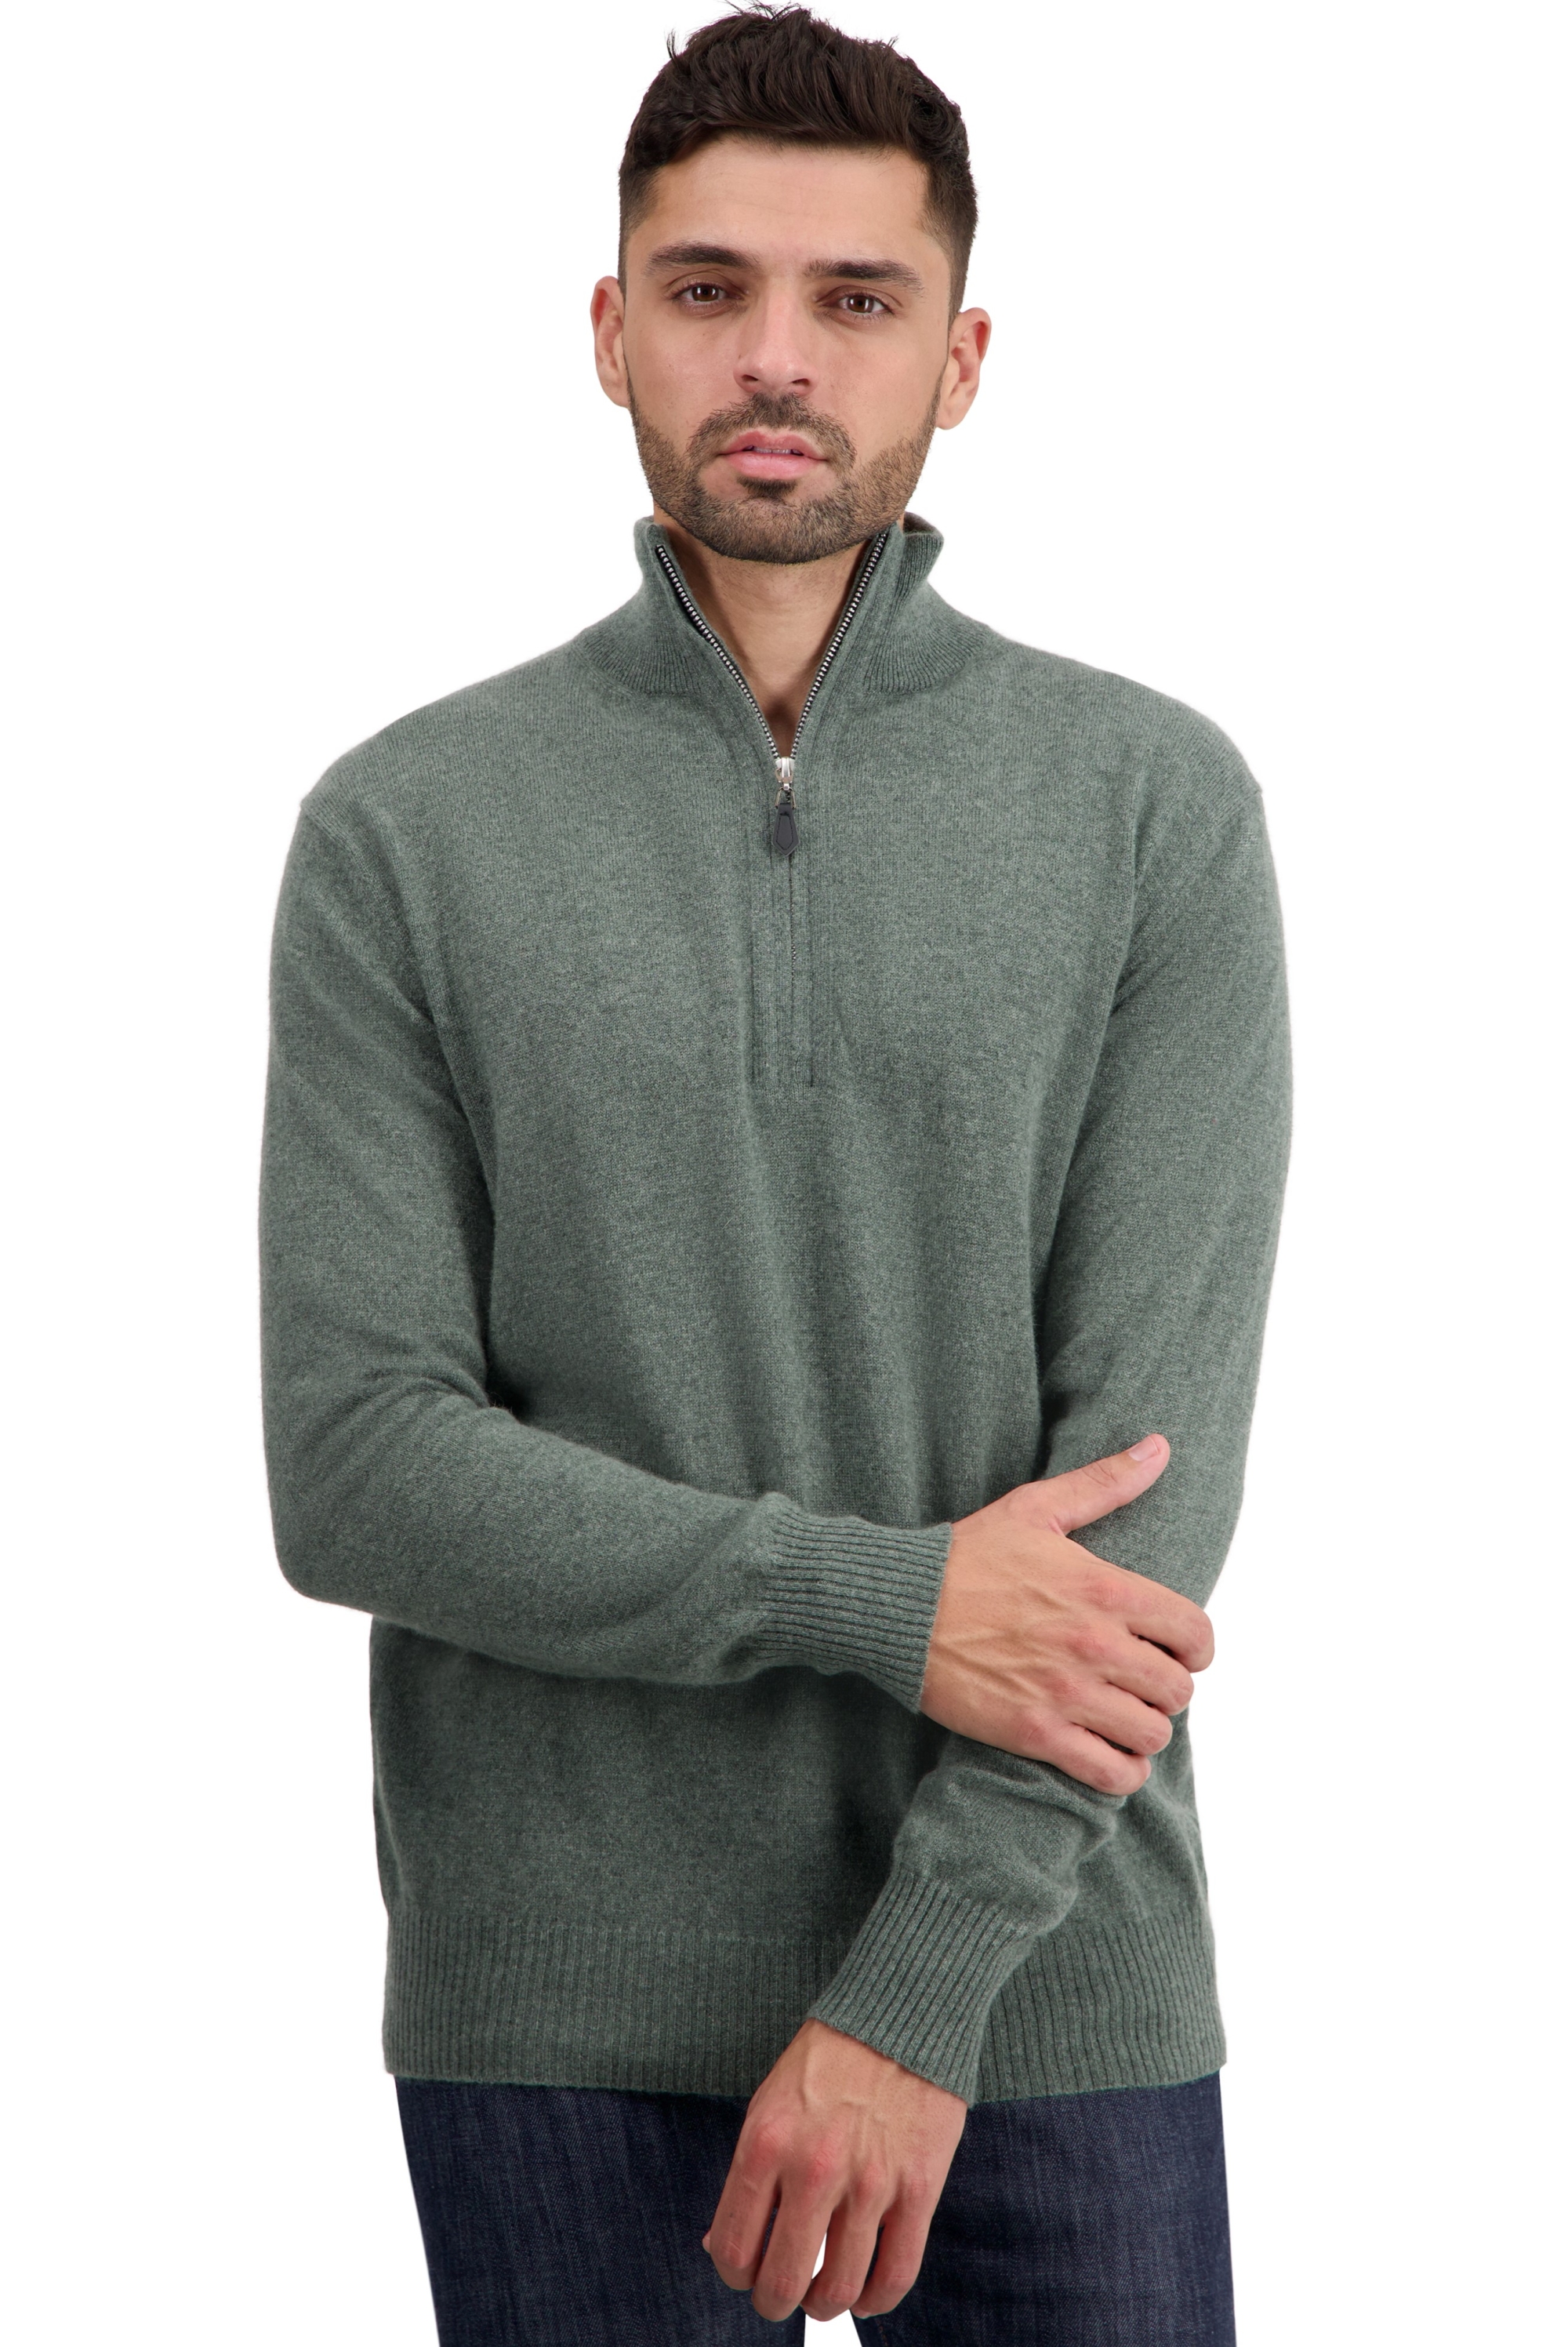 Cachemire pull homme toulon first military green xl